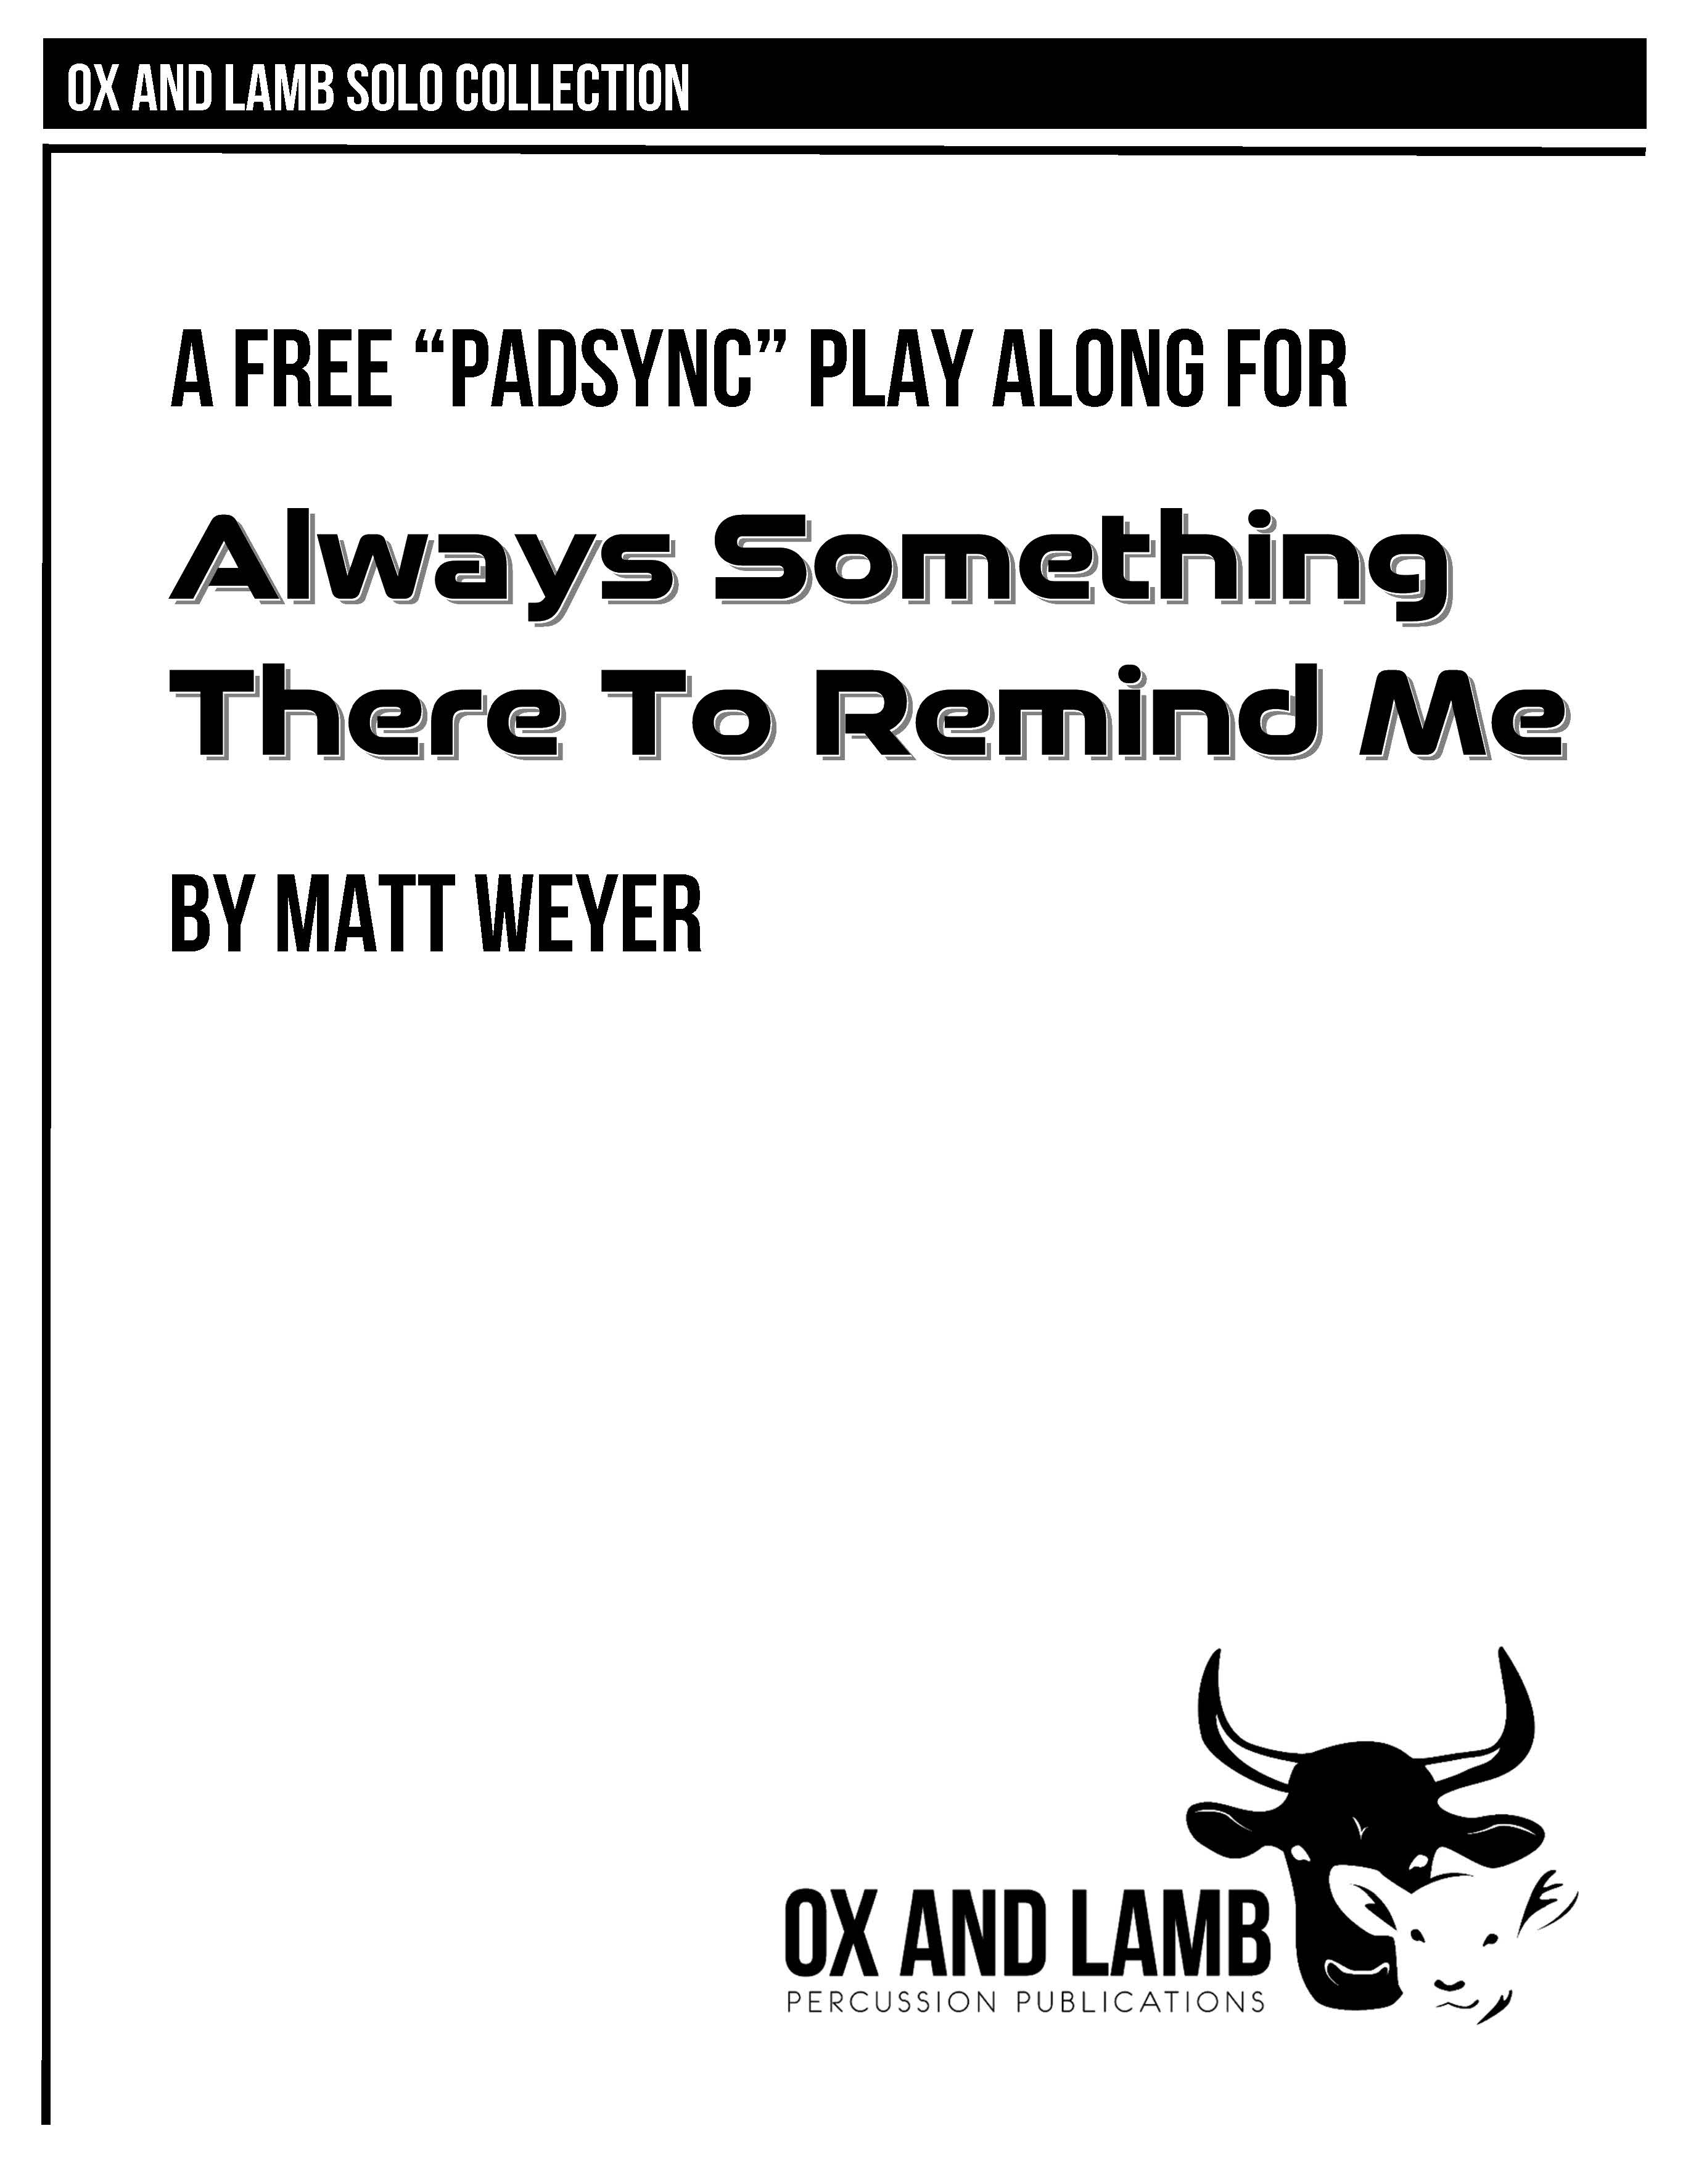 Theres Always Something There To Remind Me Genius Always Something There To Remind Me – free PadSync Play Along – Ox and